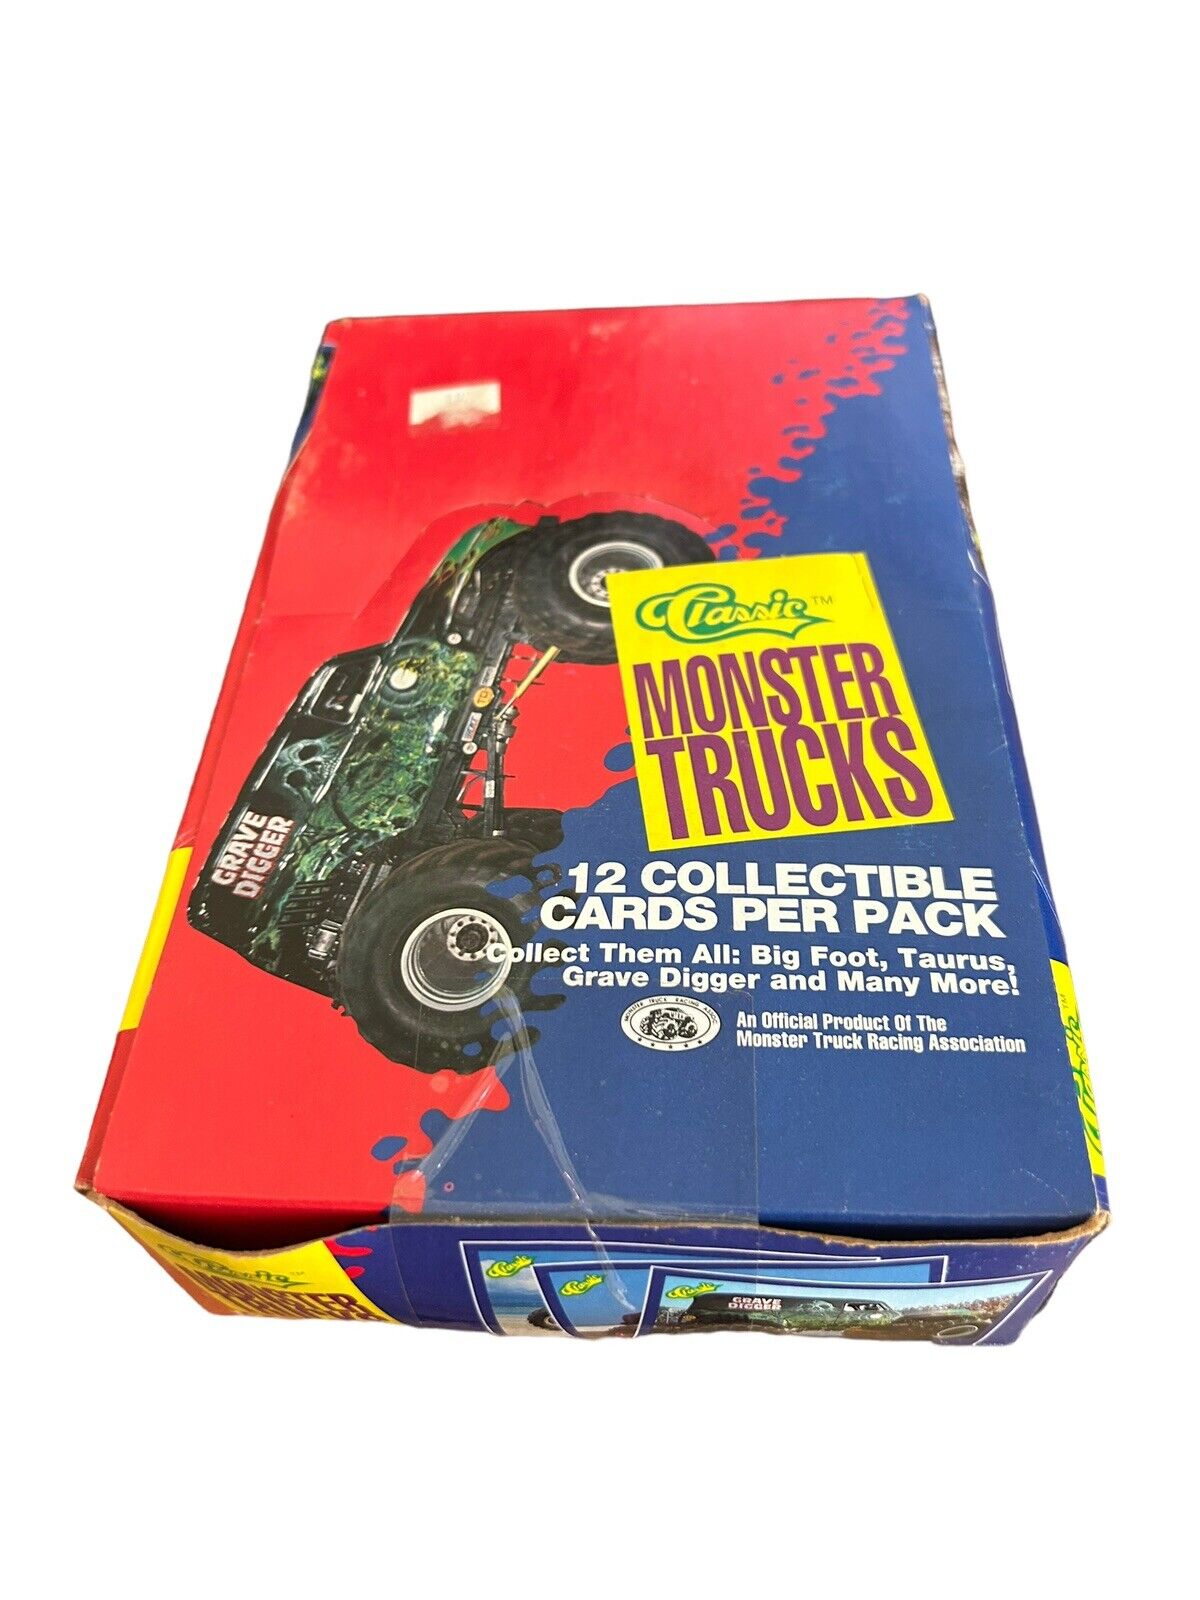 1990 Classic MONSTER TRUCKS Trading Cards Box 36 Packs Grave Digger rc